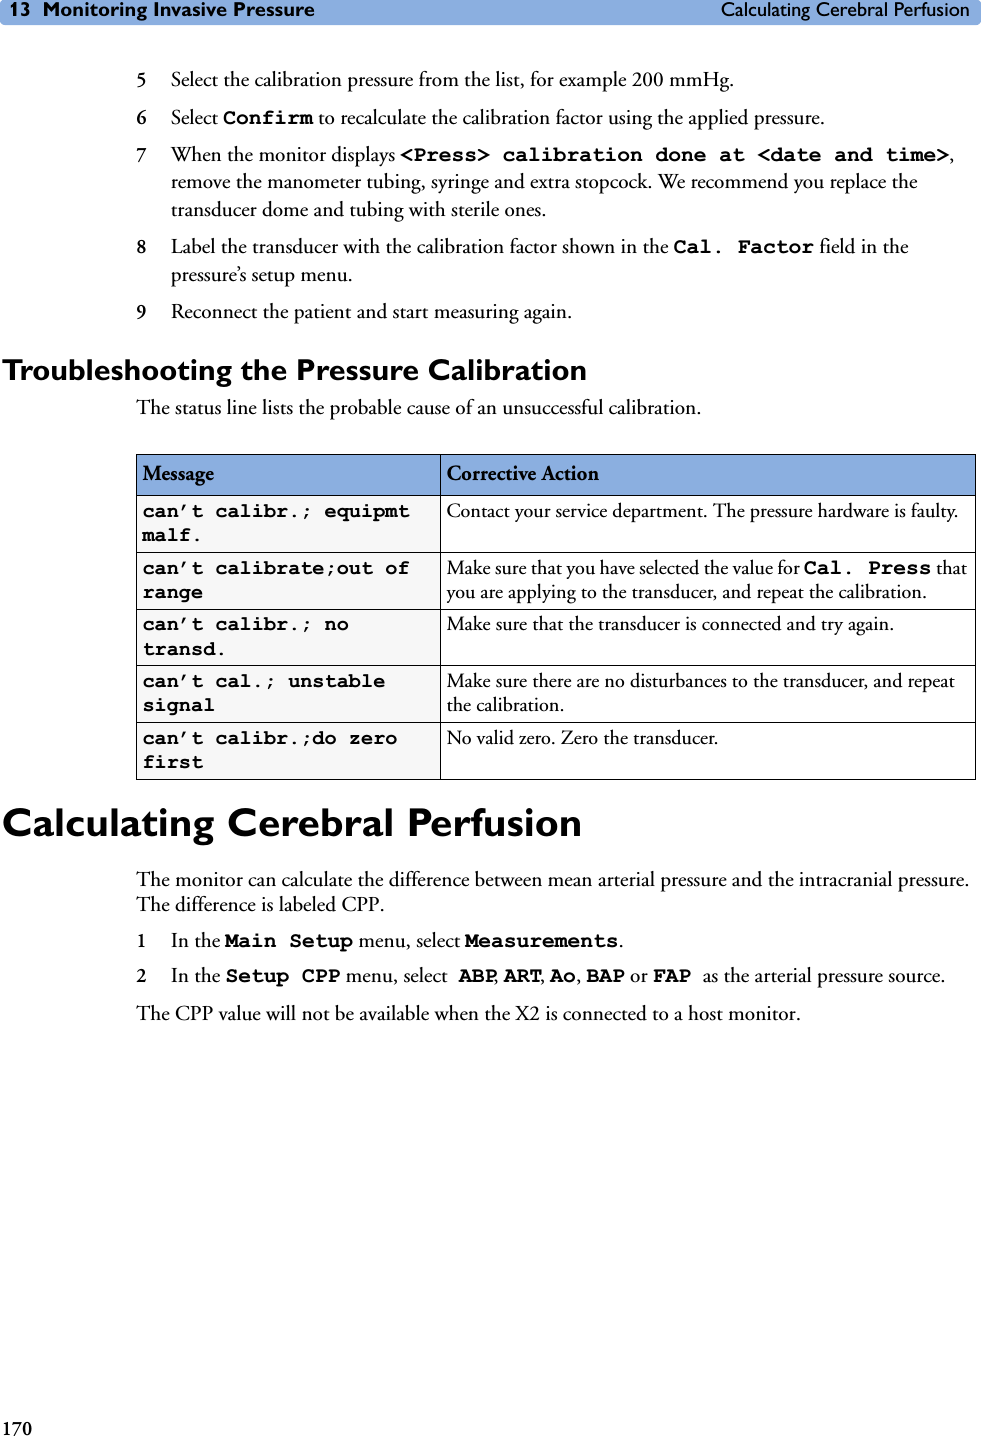 13 Monitoring Invasive Pressure Calculating Cerebral Perfusion1705Select the calibration pressure from the list, for example 200 mmHg.6Select Confirm to recalculate the calibration factor using the applied pressure. 7When the monitor displays &lt;Press&gt; calibration done at &lt;date and time&gt;, remove the manometer tubing, syringe and extra stopcock. We recommend you replace the transducer dome and tubing with sterile ones.8Label the transducer with the calibration factor shown in the Cal. Factor field in the pressure’s setup menu.9Reconnect the patient and start measuring again.Troubleshooting the Pressure CalibrationThe status line lists the probable cause of an unsuccessful calibration.Calculating Cerebral PerfusionThe monitor can calculate the difference between mean arterial pressure and the intracranial pressure. The difference is labeled CPP.1In the Main Setup menu, select Measurements.2In the Setup CPP menu, select ABP, ART, Ao, BAP or FAP as the arterial pressure source.The CPP value will not be available when the X2 is connected to a host monitor.Message Corrective Actioncan’t calibr.; equipmt malf.Contact your service department. The pressure hardware is faulty.can’t calibrate;out of rangeMake sure that you have selected the value for Cal. Press that you are applying to the transducer, and repeat the calibration.can’t calibr.; no transd.Make sure that the transducer is connected and try again.can’t cal.; unstable signalMake sure there are no disturbances to the transducer, and repeat the calibration.can’t calibr.;do zero firstNo valid zero. Zero the transducer.